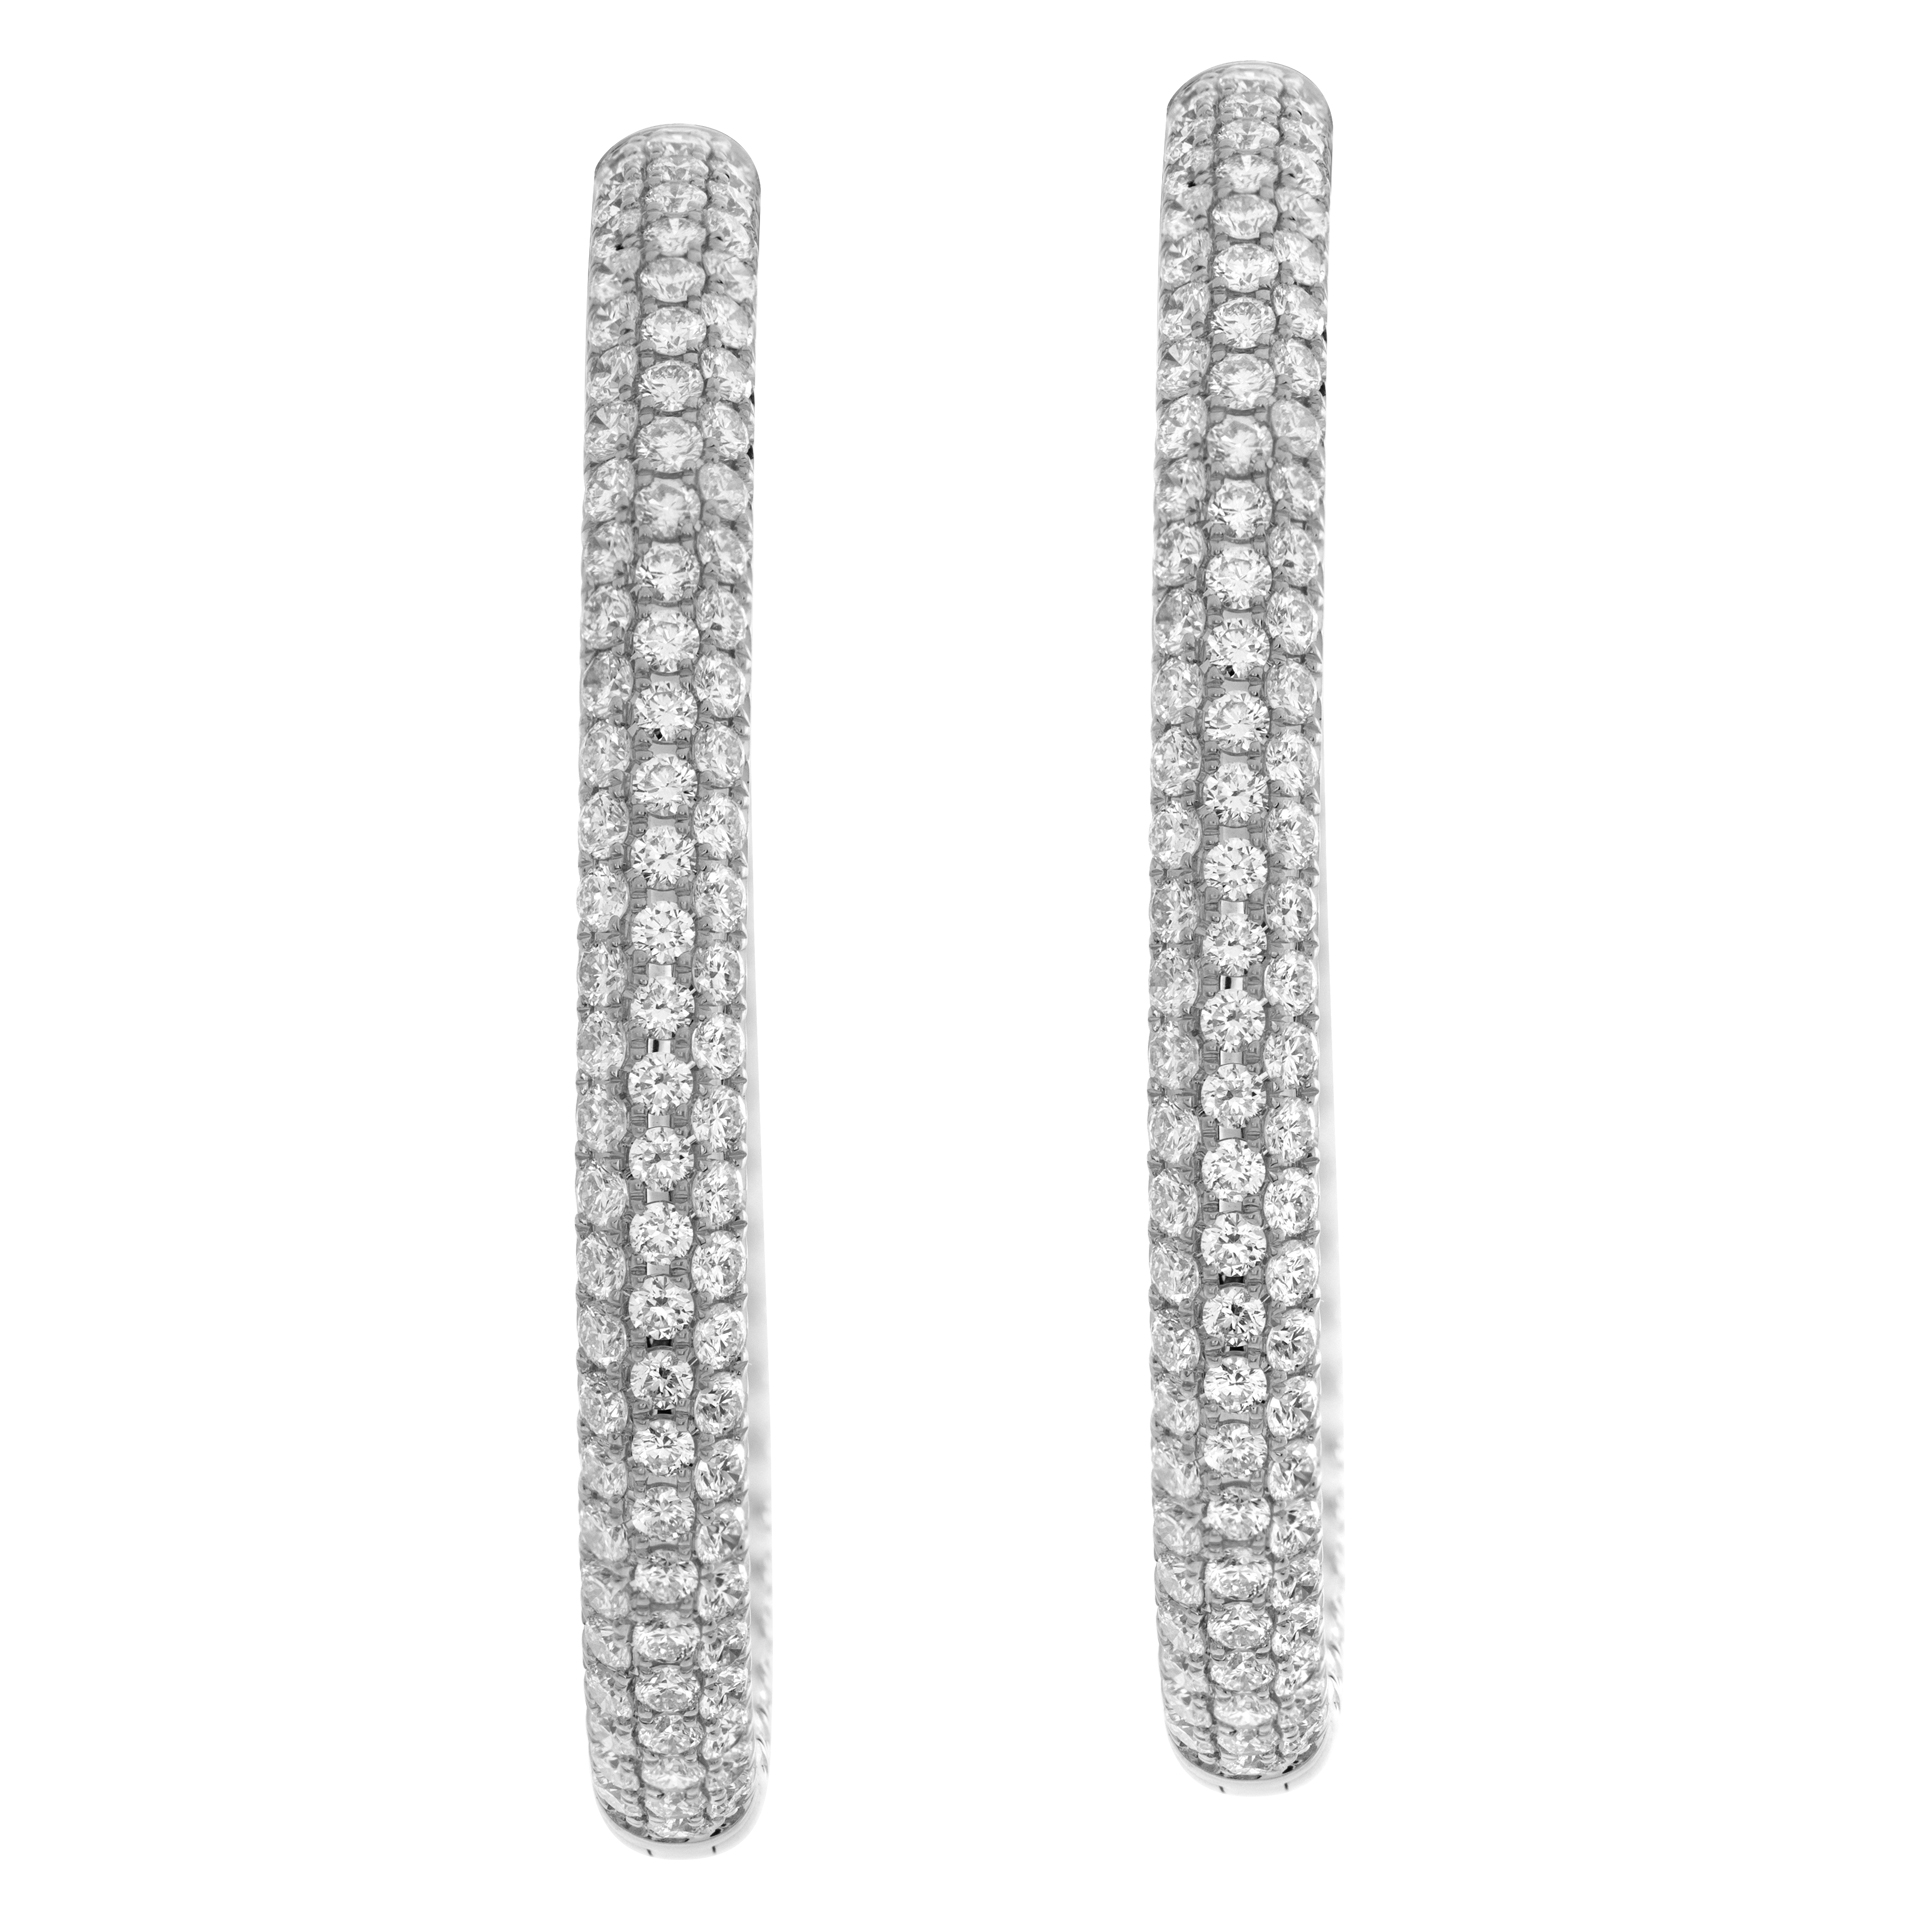 18k white gold inside out pave diamond hoop earrings with 5.63 carats in round diamonds